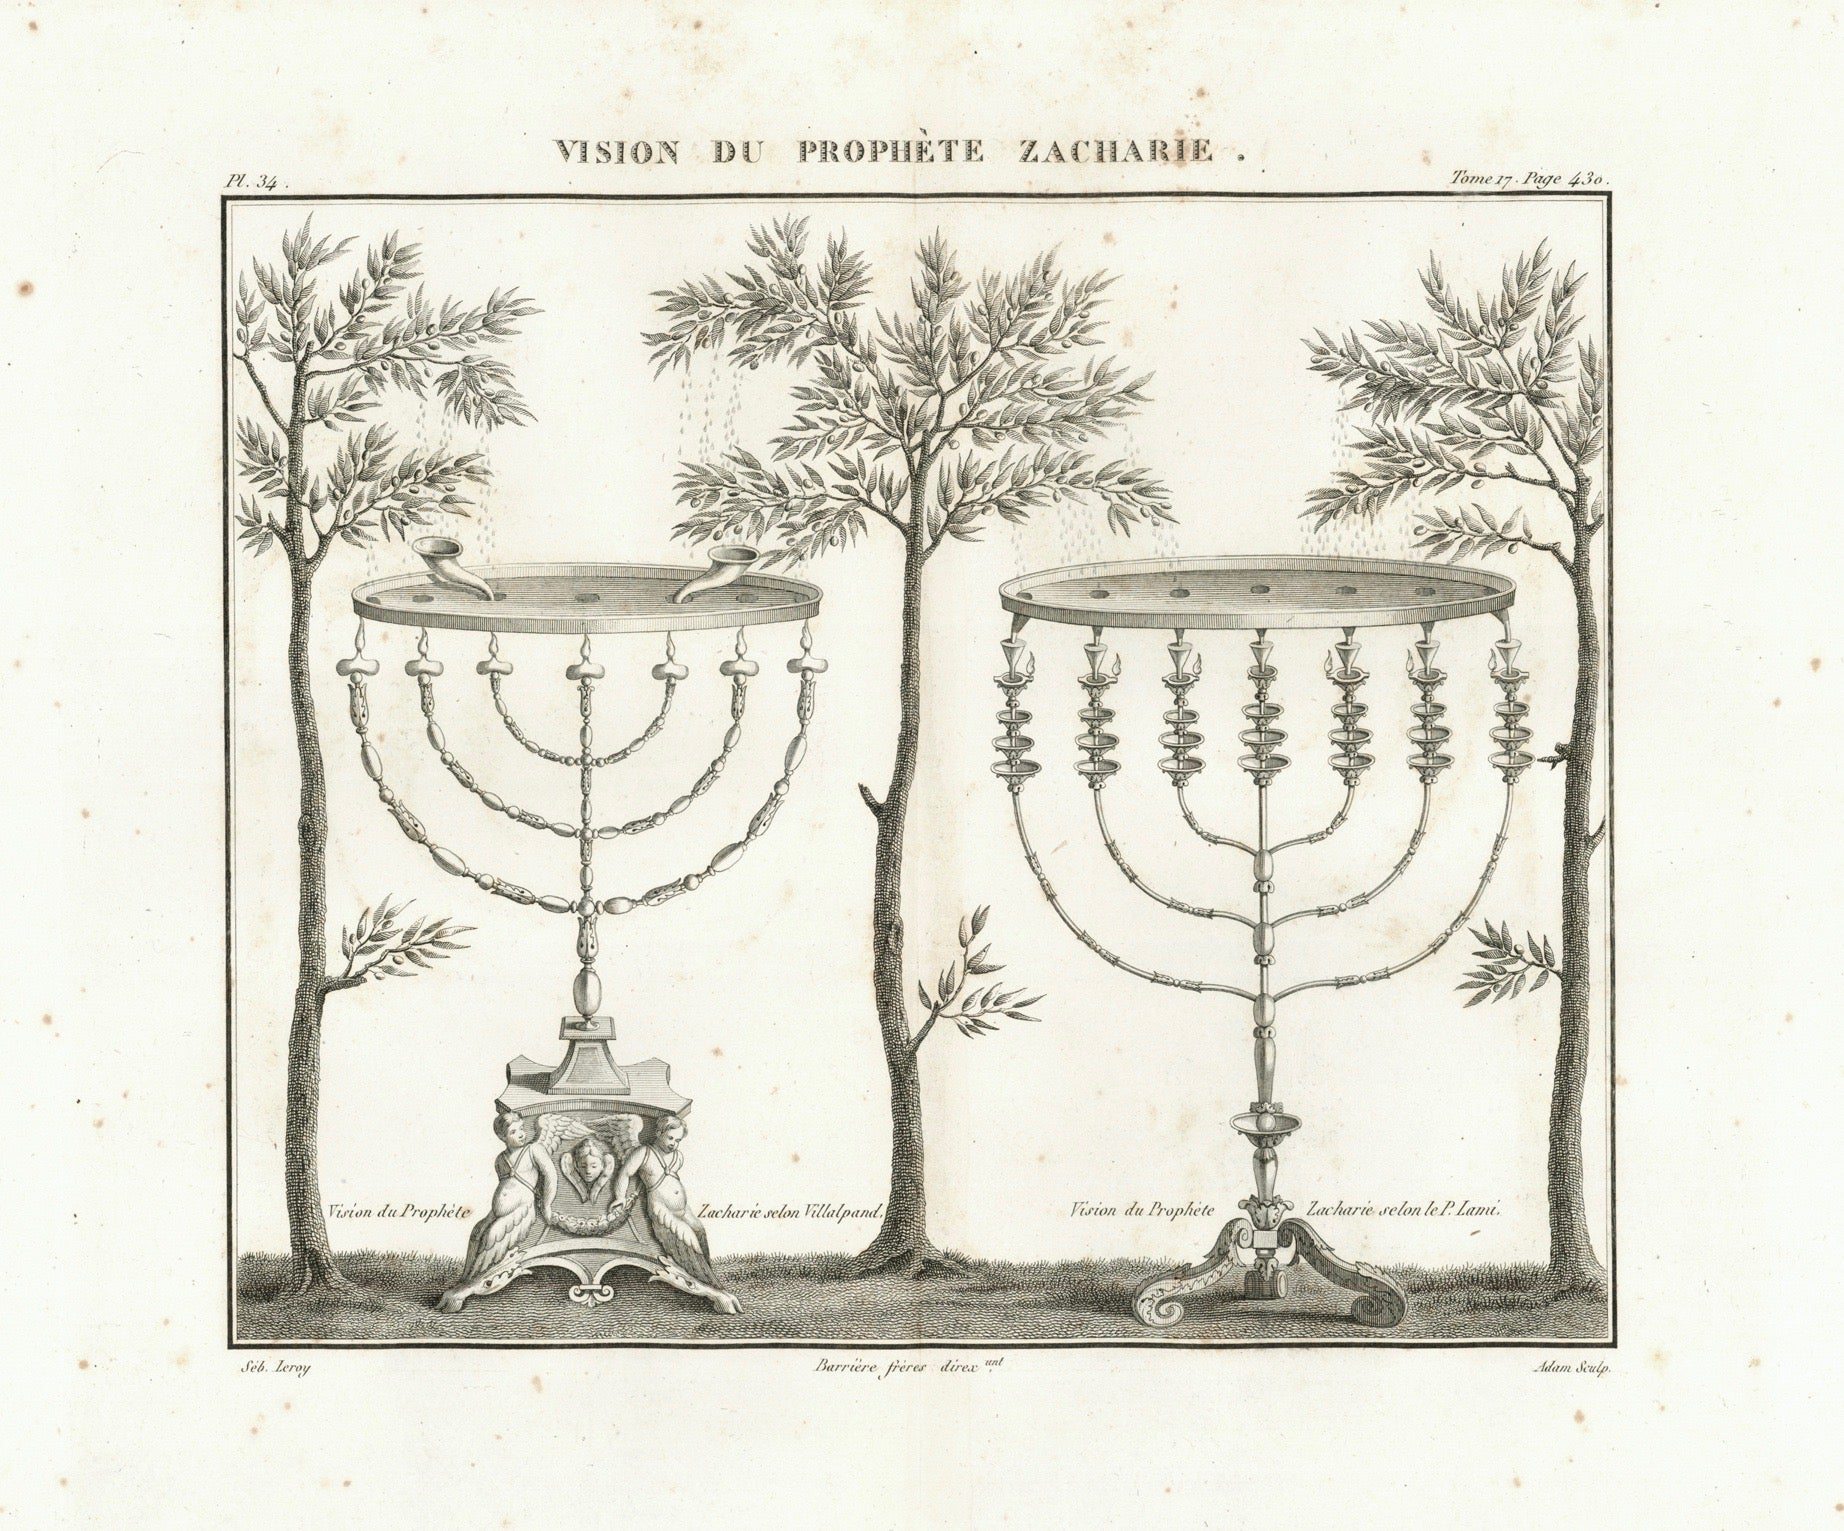 Menorah and Olive trees. Part of the 7 visions of the prophet Zachary in the book "Protosacharja".  Left side of print: Vision of Zachary according to Villalpand  Right side of print: Vision of Zachary according to P. Lami  Copper etching by Adam after the drawing by Leroy  Published in "Saint Bible de Vence" by Abbe Henri-Francois de Vence  Paris, 1827